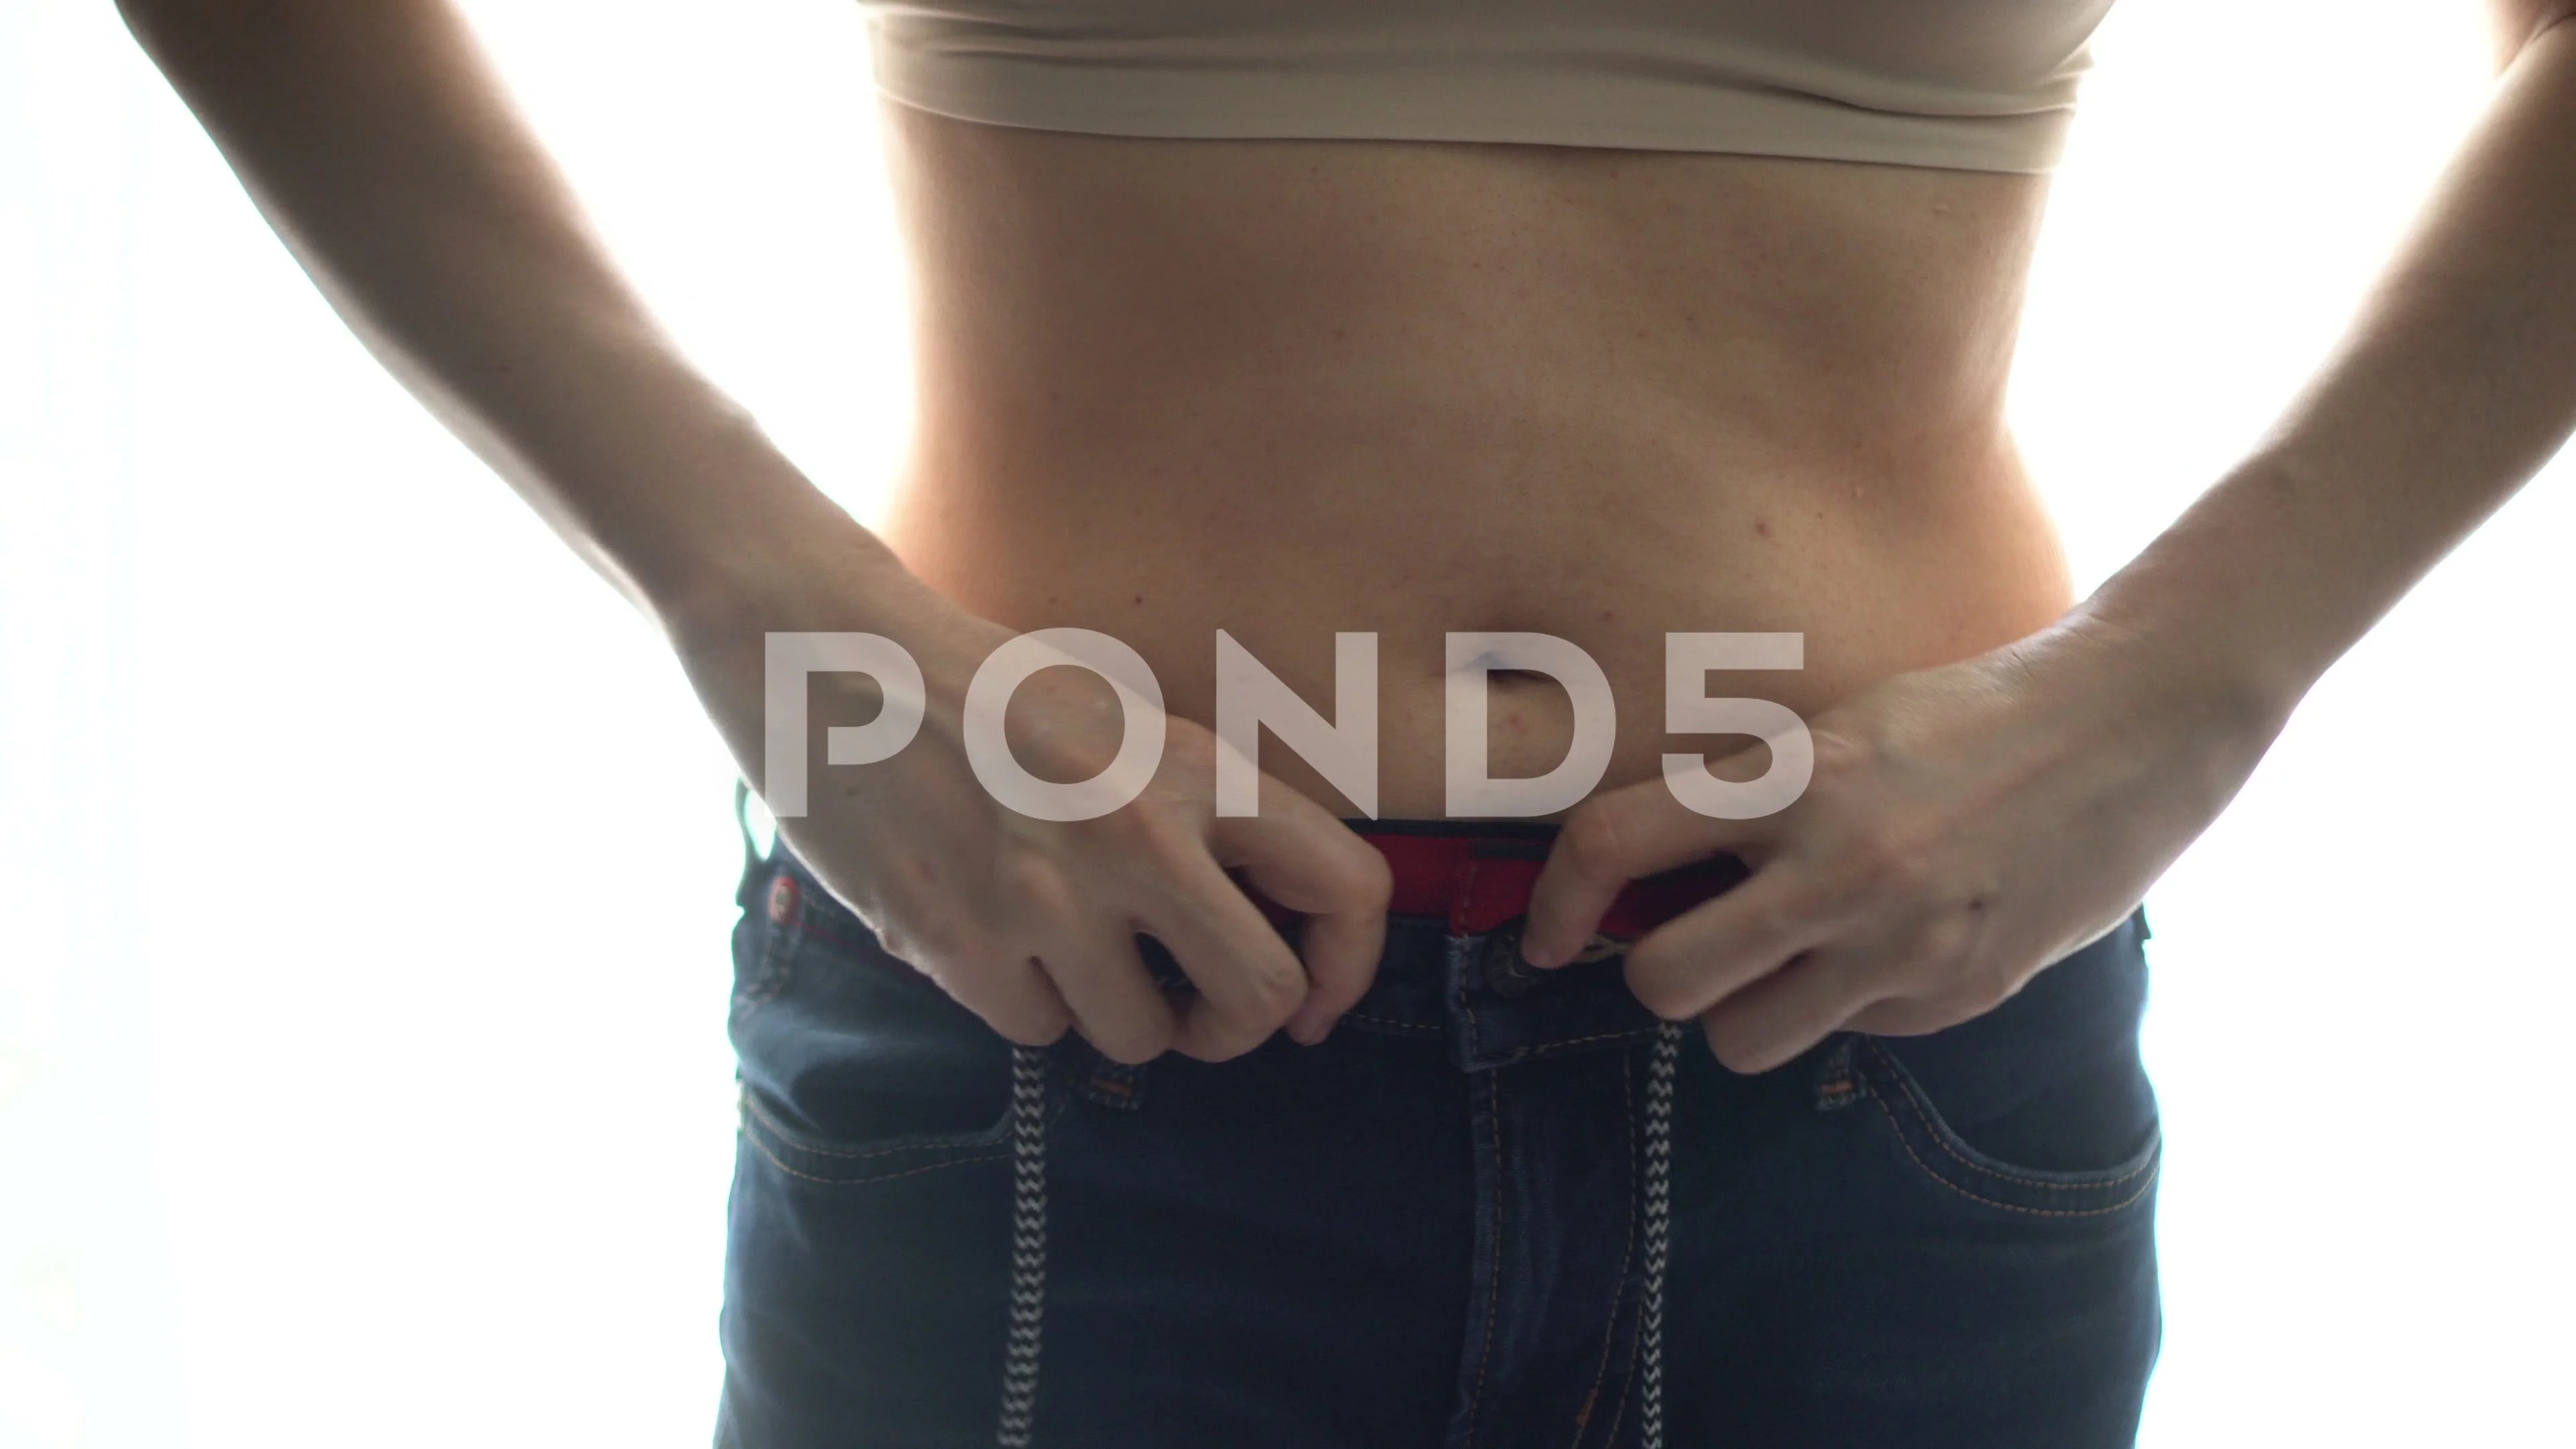 The Woman in Underwear Holds Belly Fat. Closeup., Stock Footage